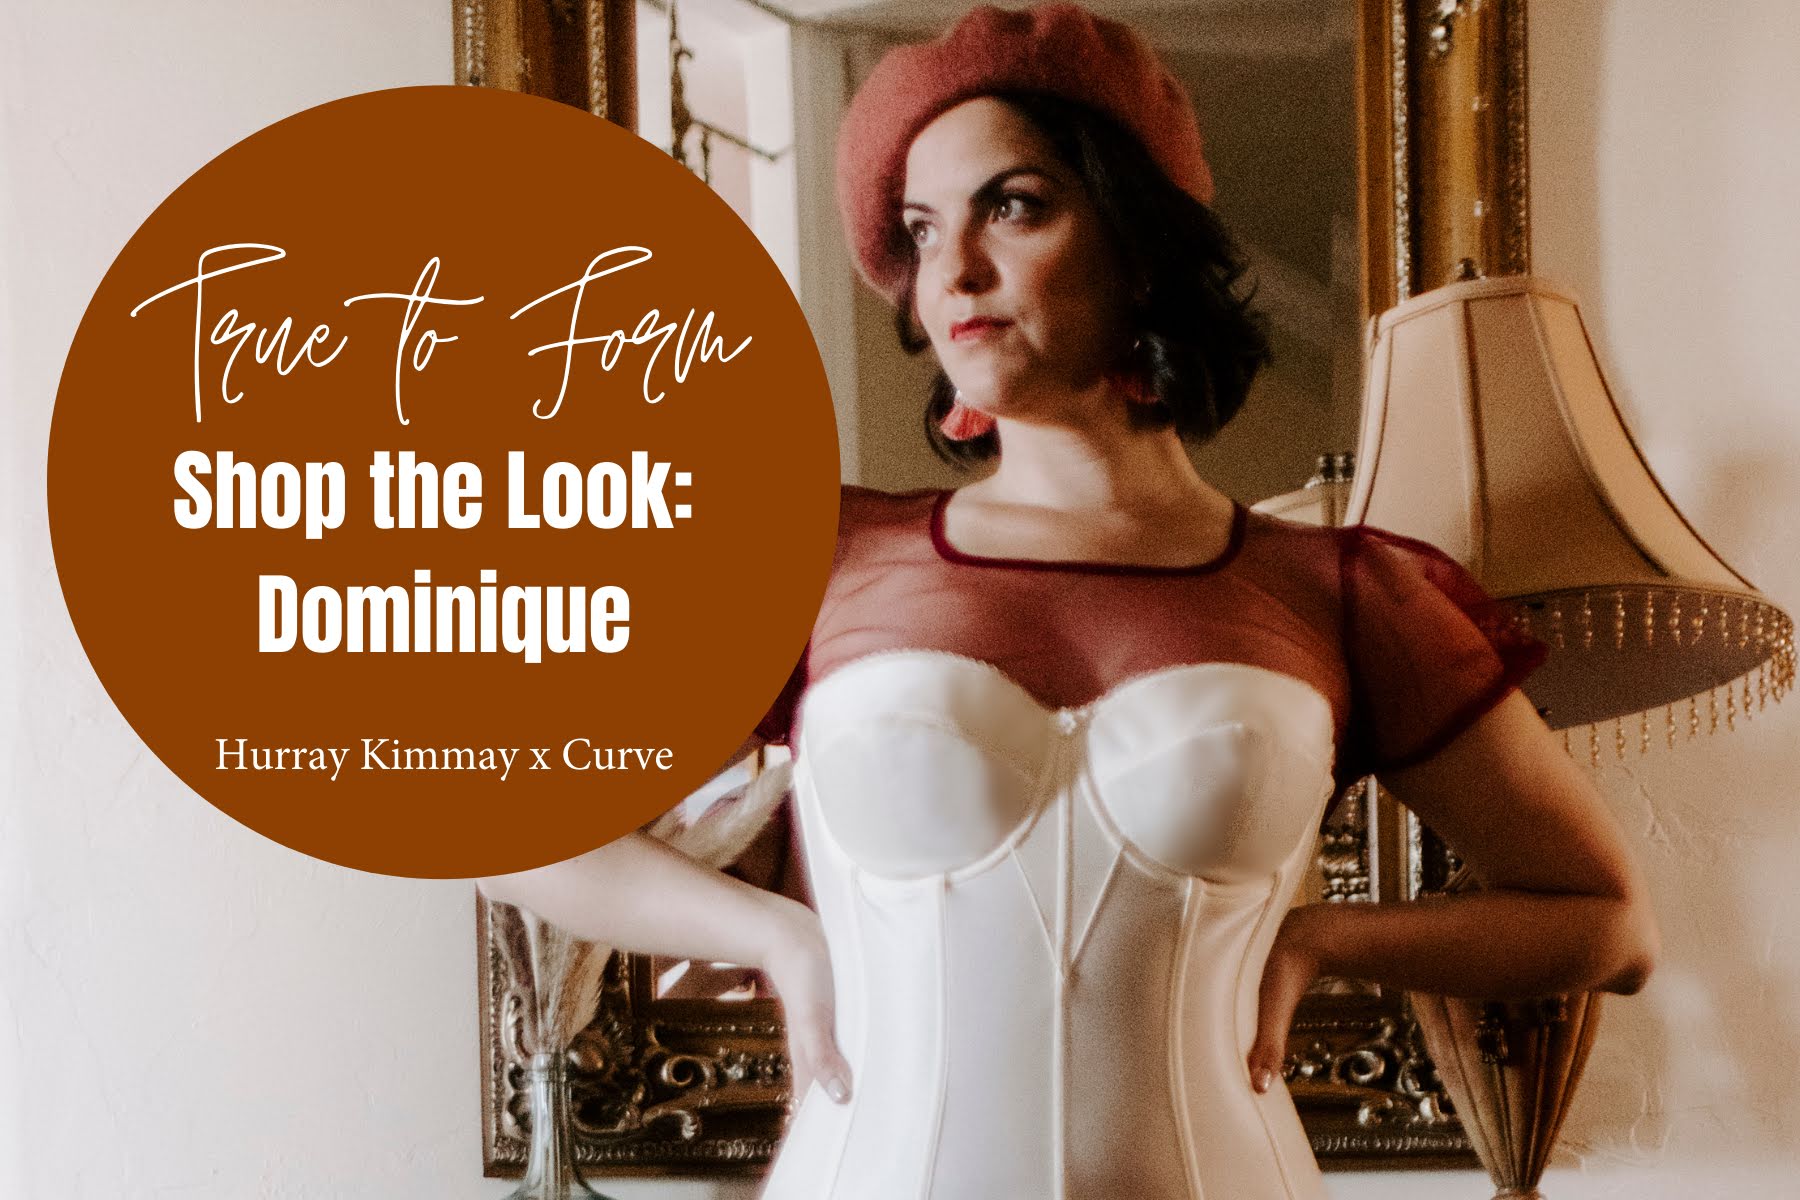 Shop the Look: Dominique - Hurray Kimmay